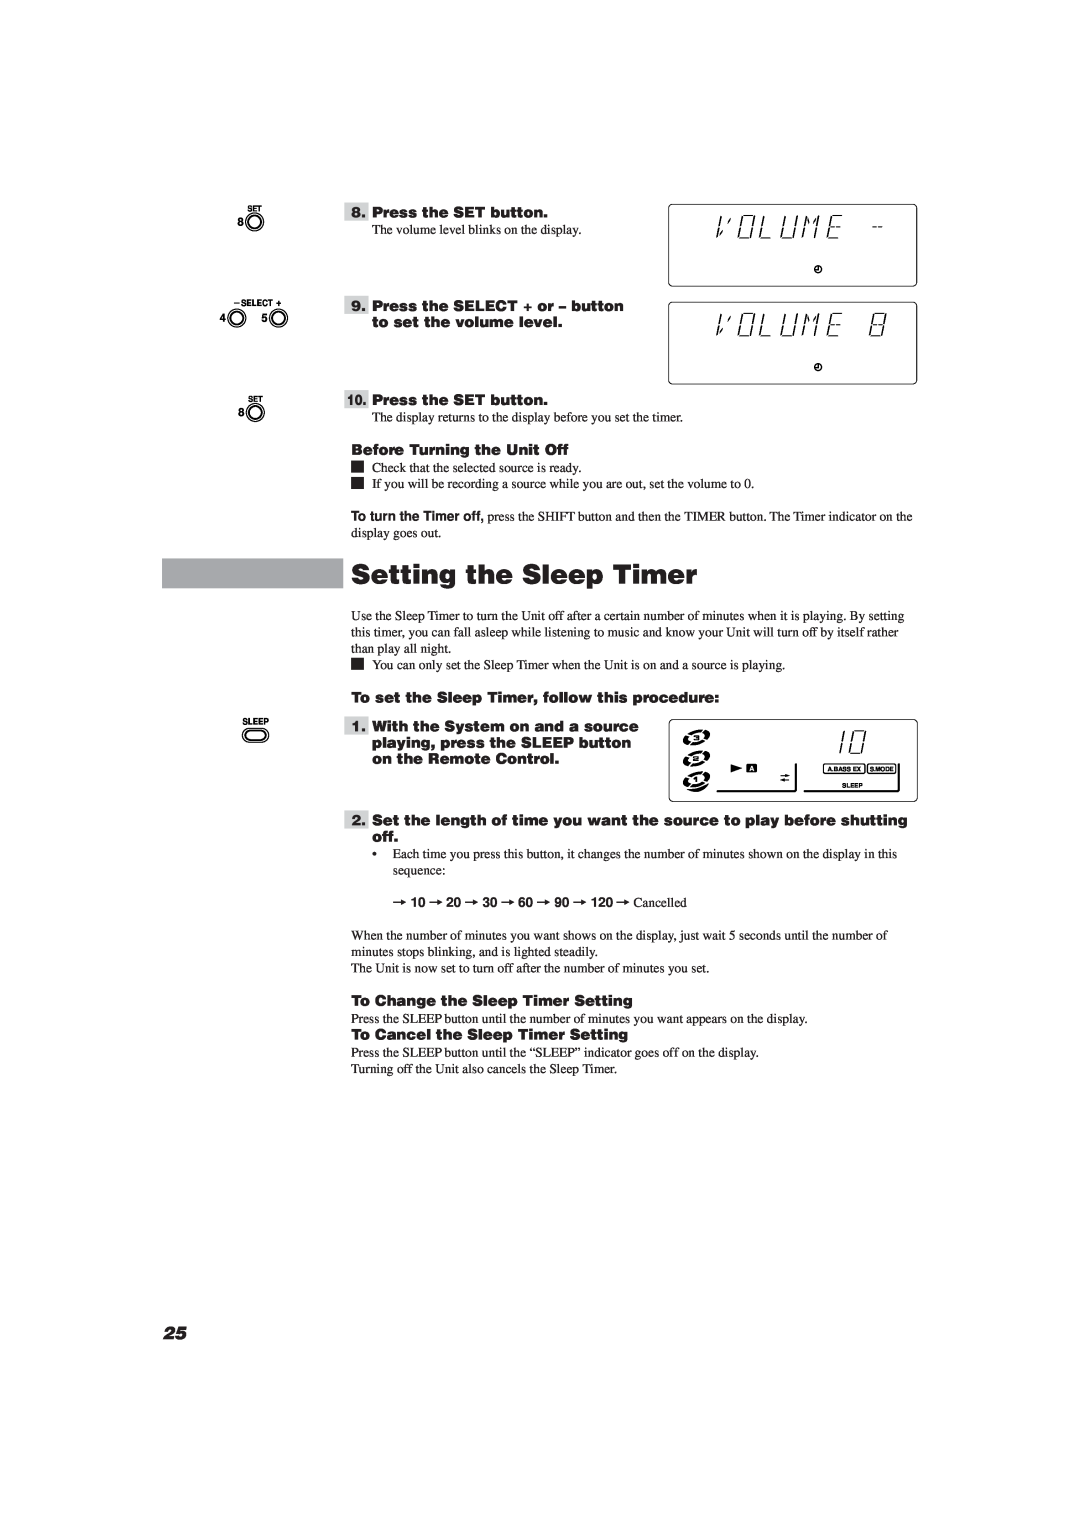 JVC CA-MXJ10 Setting the Sleep Timer, Press the SET button, Before Turning the Unit Off, To Change the Sleep Timer Setting 